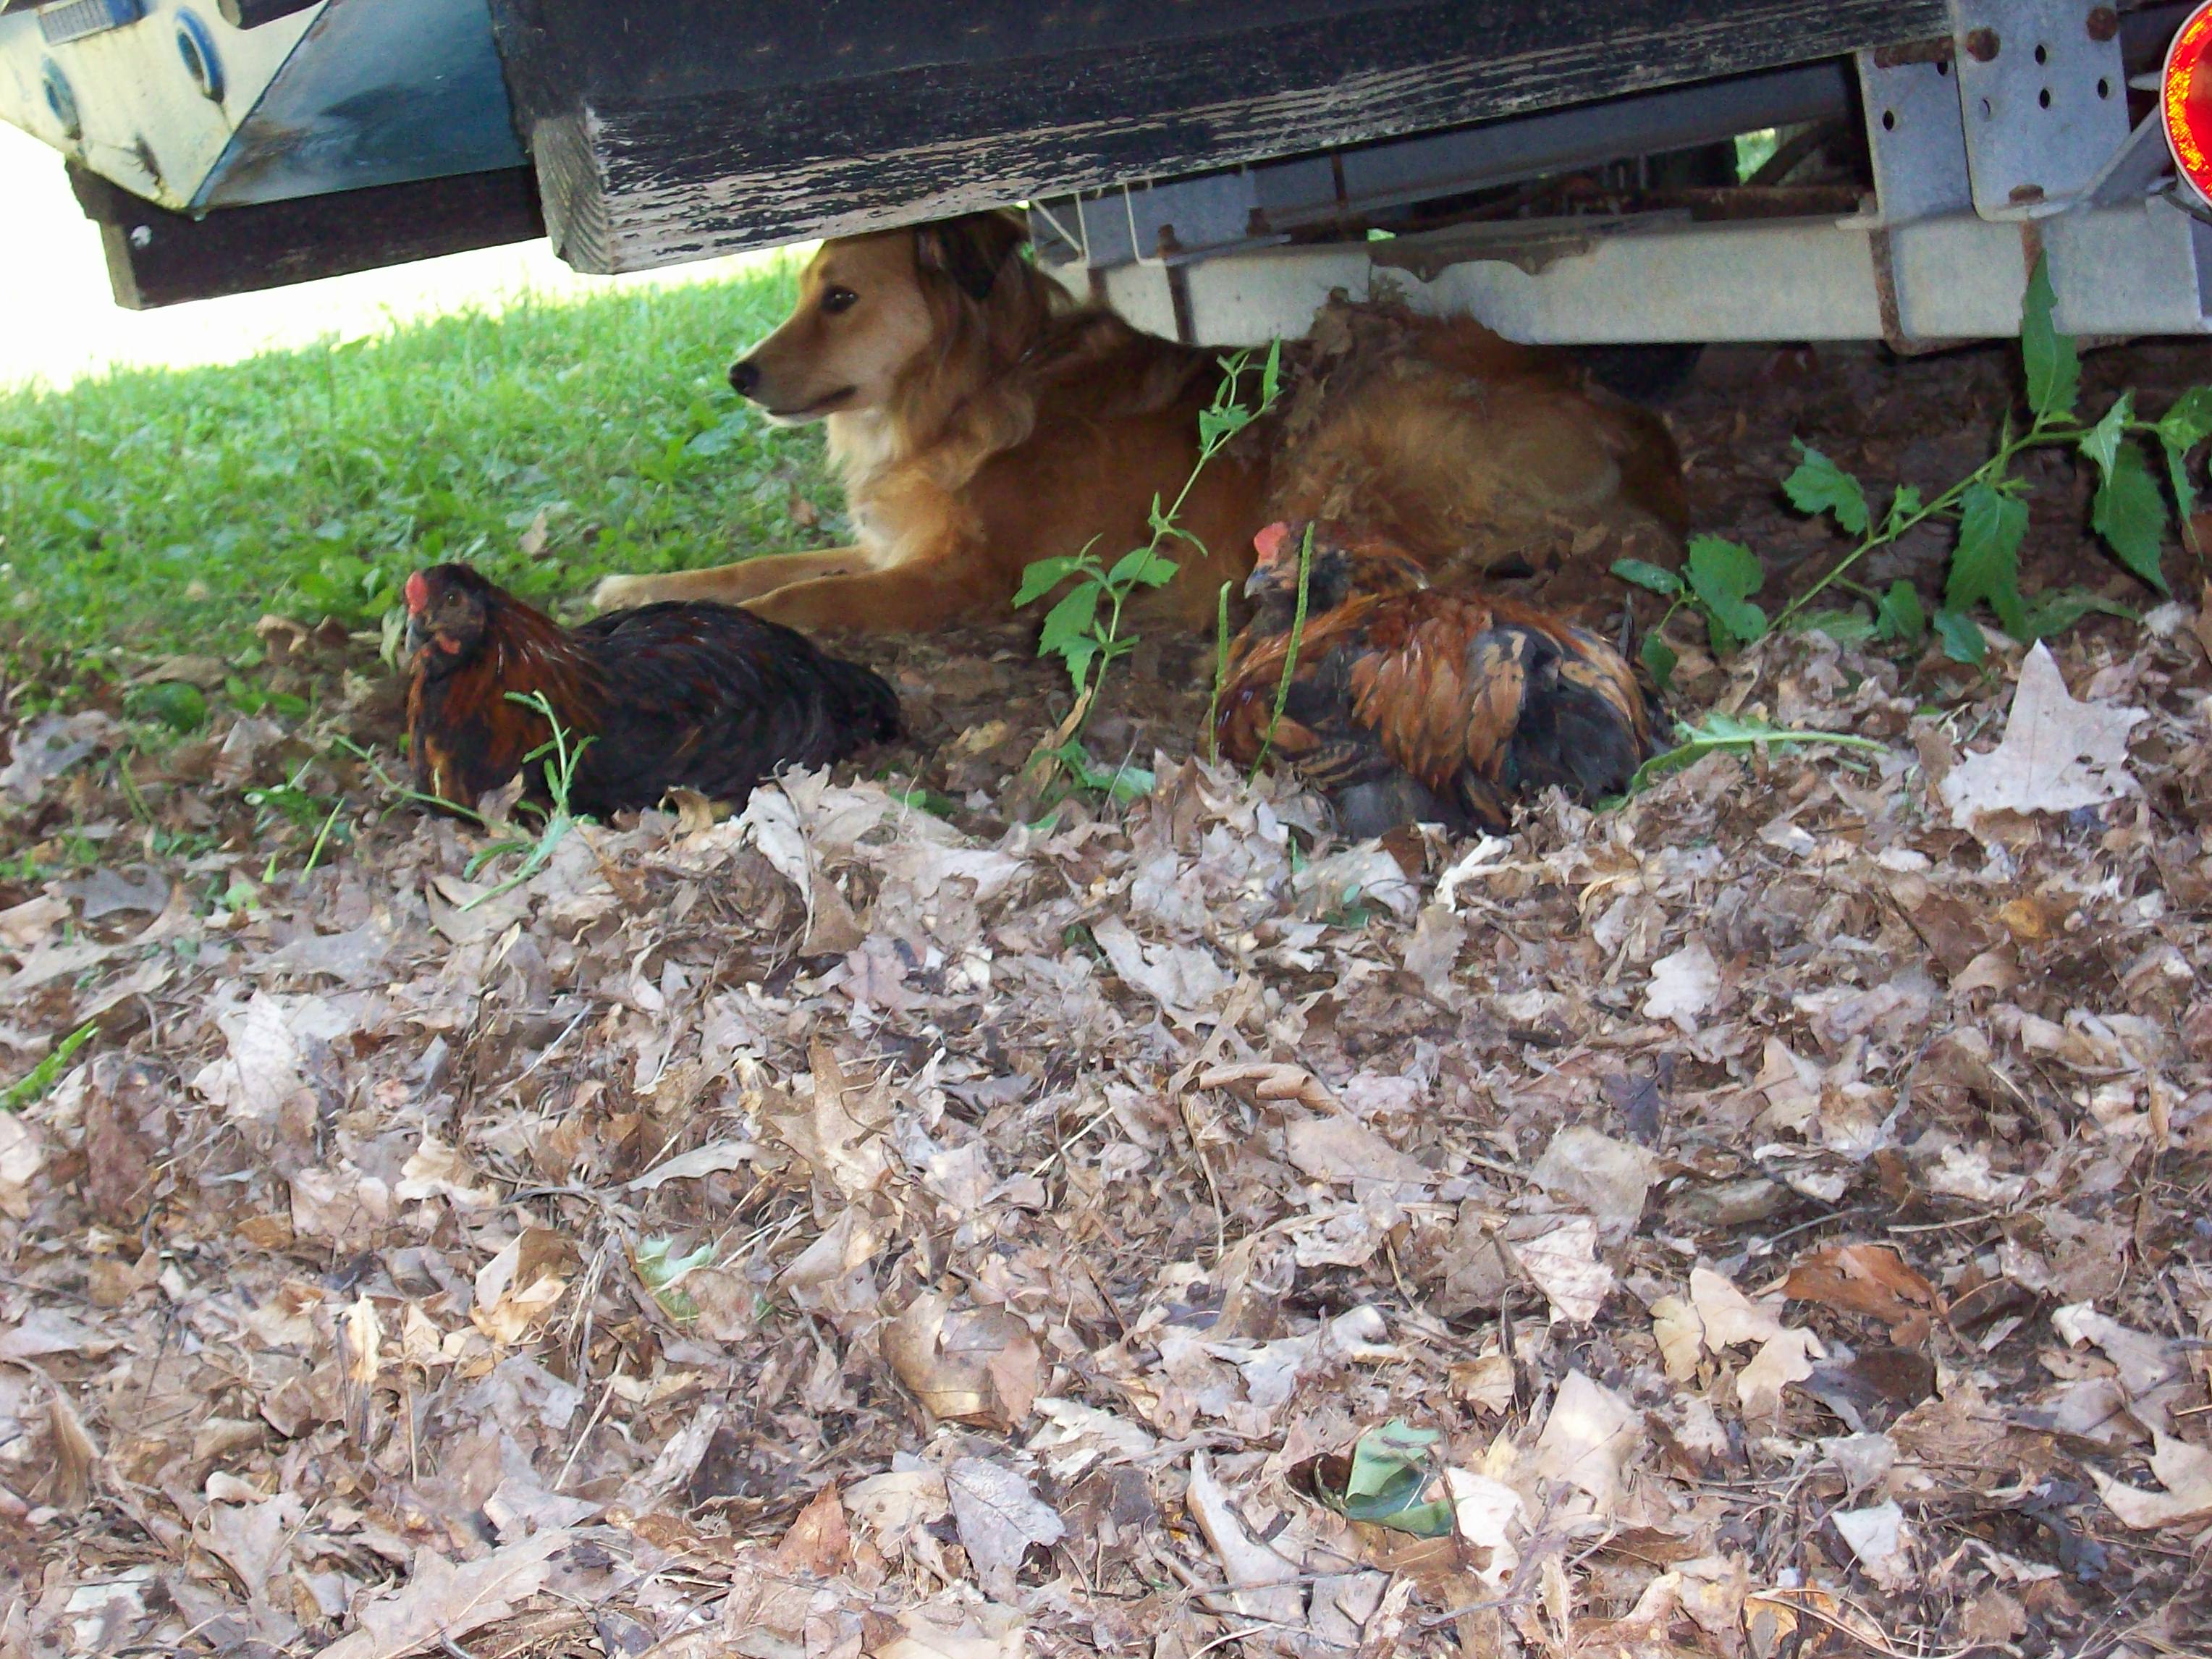 Hanging out in the shade, Mindy, RB (roo) and Mr Greenjeans (roo)